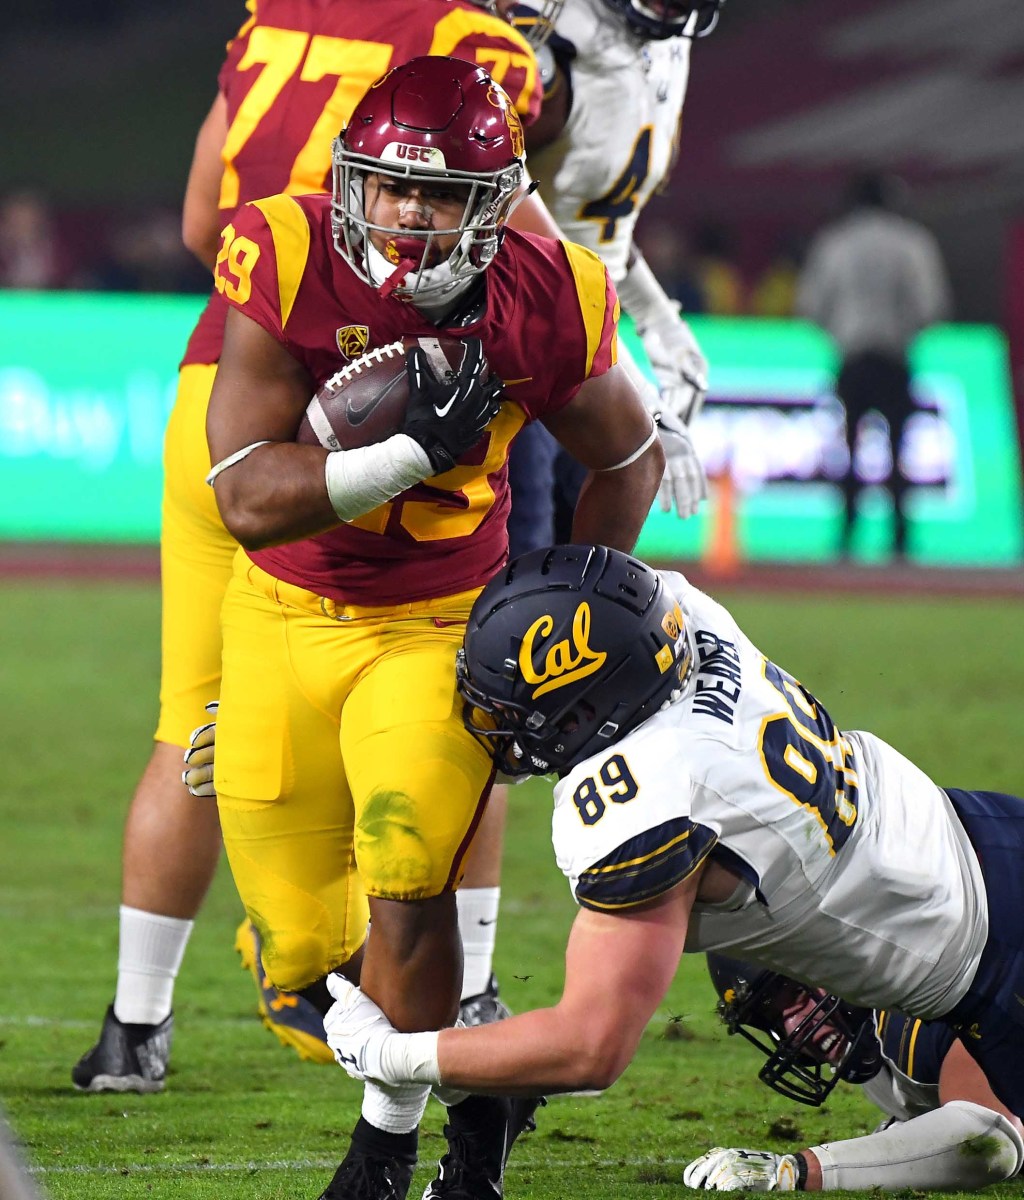 Nov 10, 2018; Los Angeles, CA, USA; USC Trojans running back Vavae Malepeai (29) runs for a short game before he is stopped by California Golden Bears linebacker Evan Weaver (89) in the first quarter of the game at the Los Angeles Memorial Coliseum. Mandatory Credit: Jayne Kamin-Oncea-USA TODAY Sports